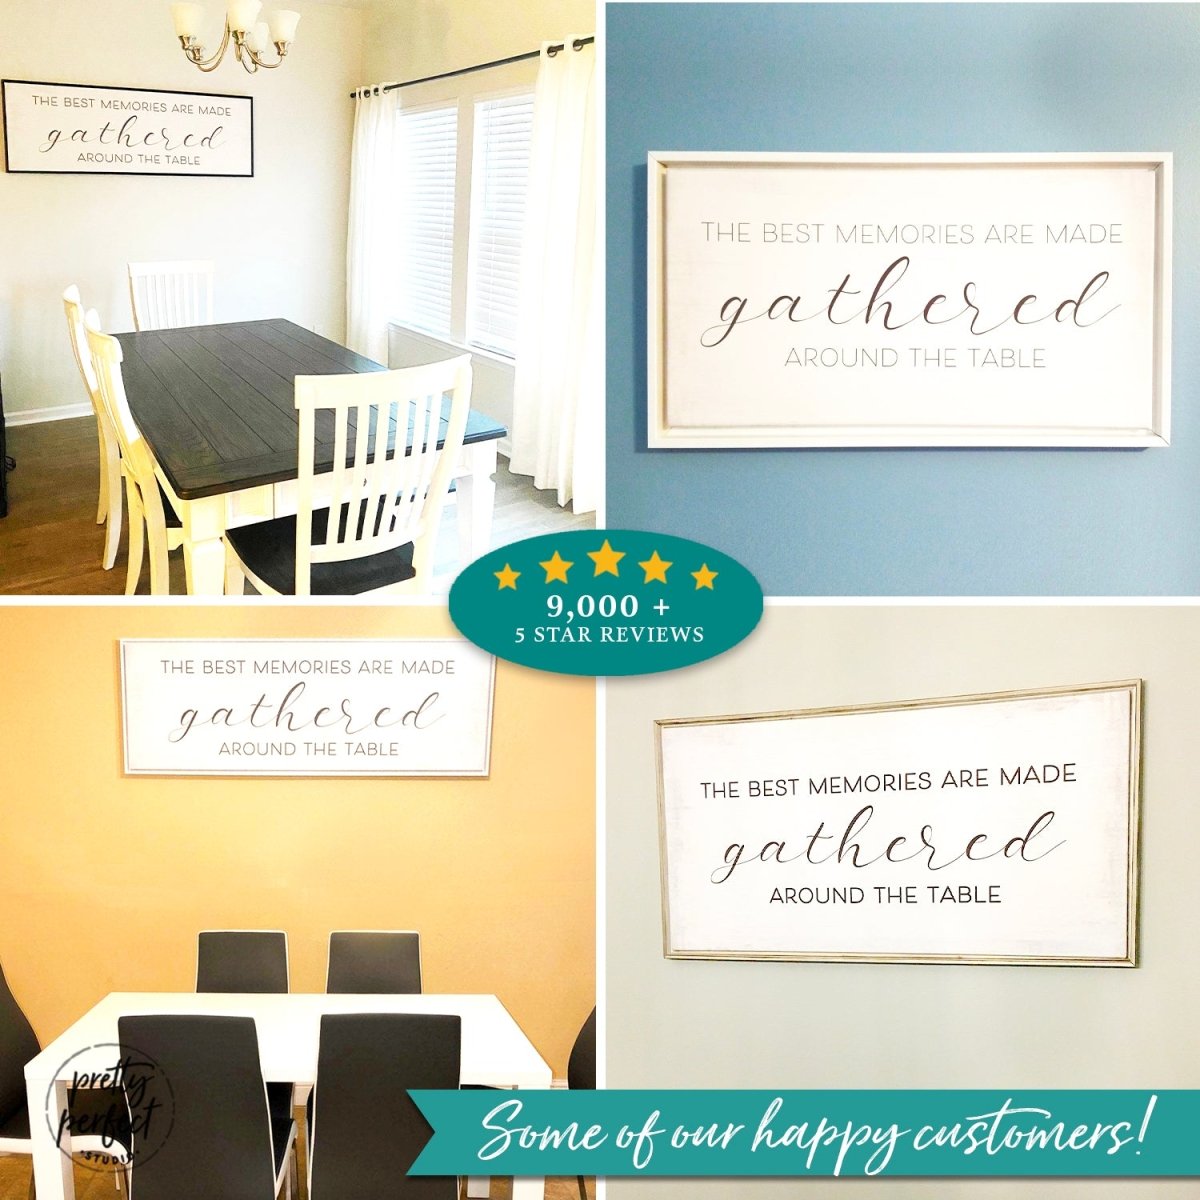 Customer product review for the best memories are made gathered around the table wall art by Pretty Perfect Studio